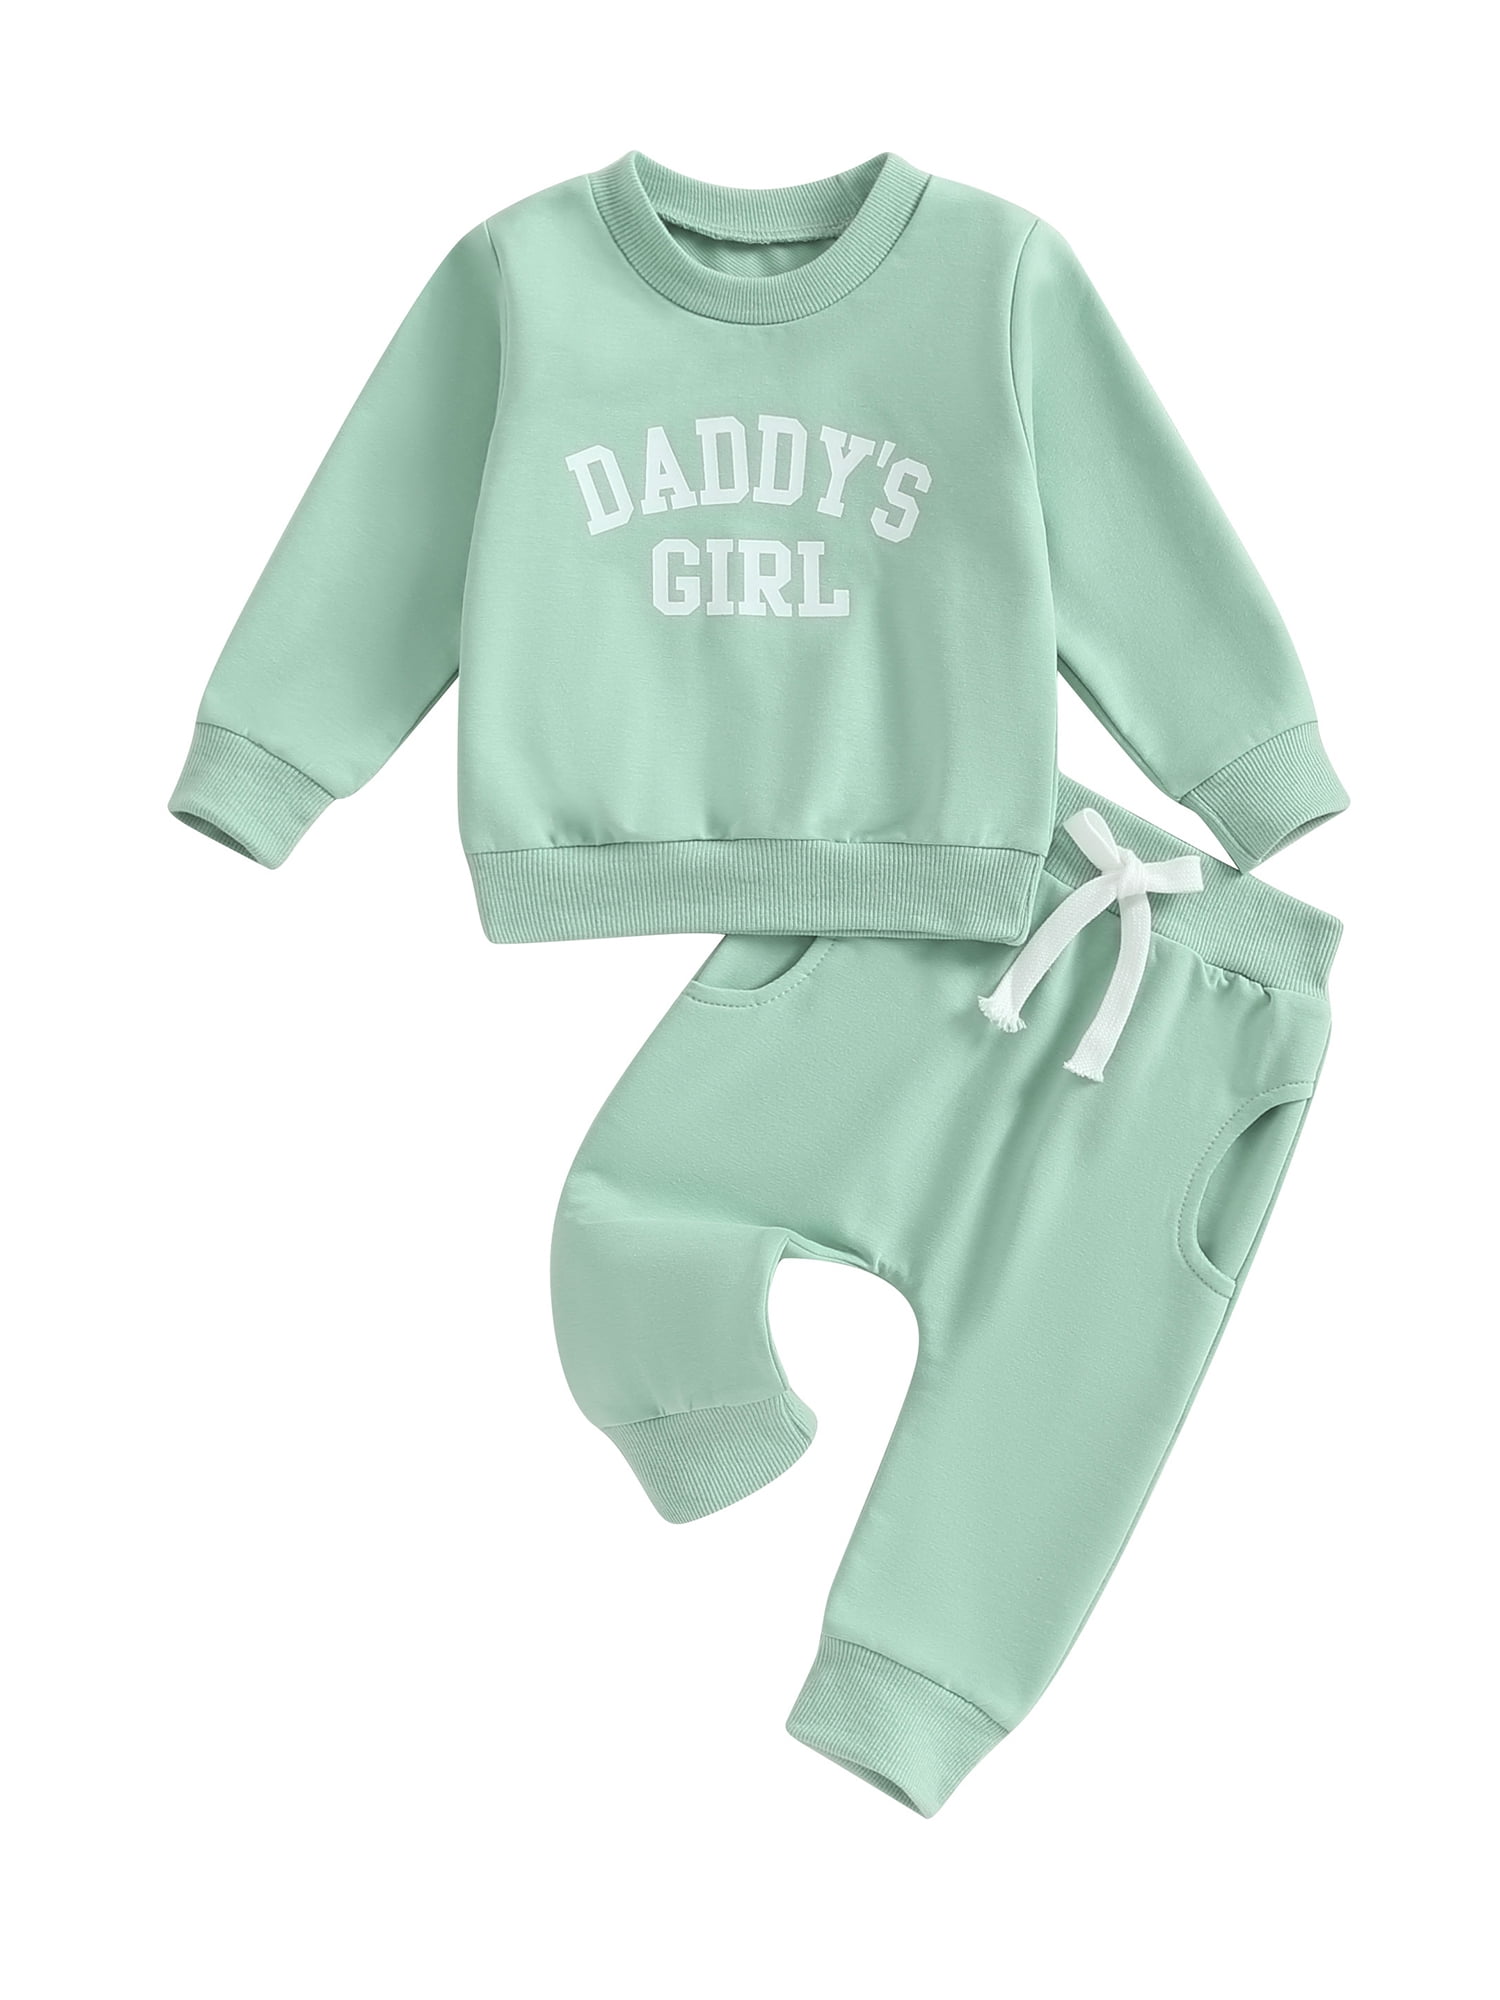 Toddler Girls 2 Piece Outfit Letter Print Sweatshirt and Elastic Pants ...